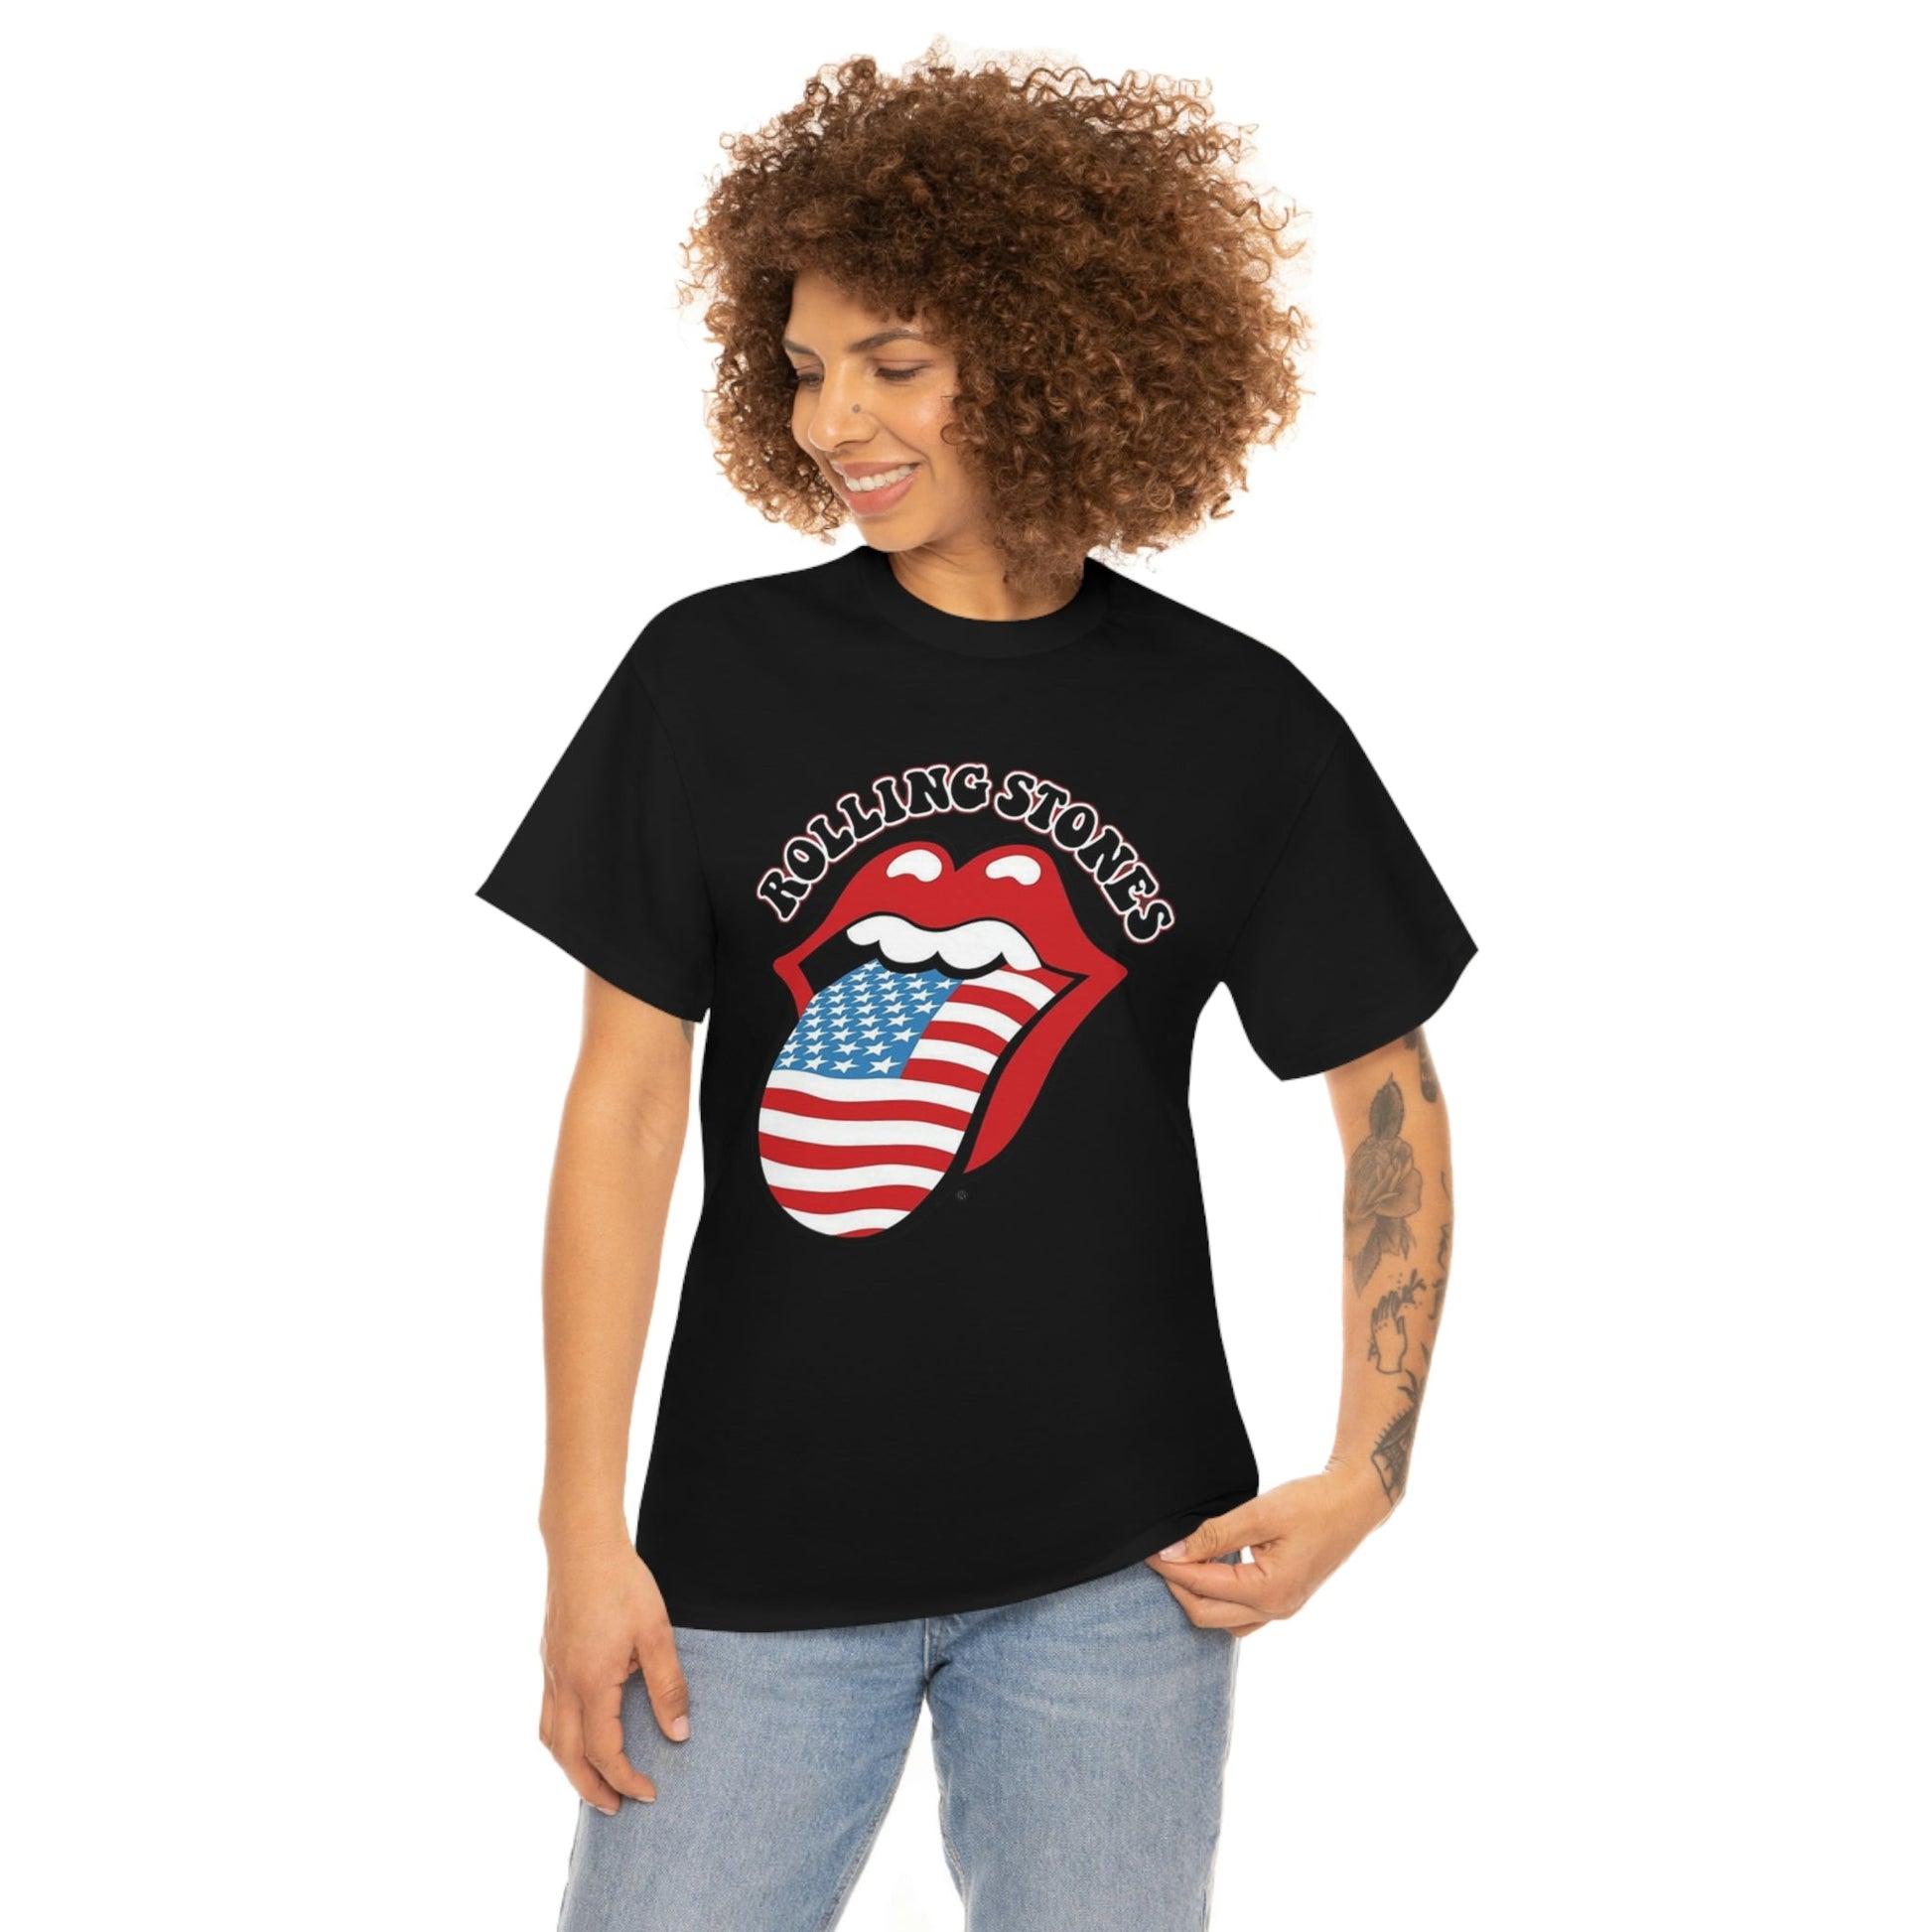 Rolling Stones Vintage Distressed Tongue T-Shirt - RetroTeeShop